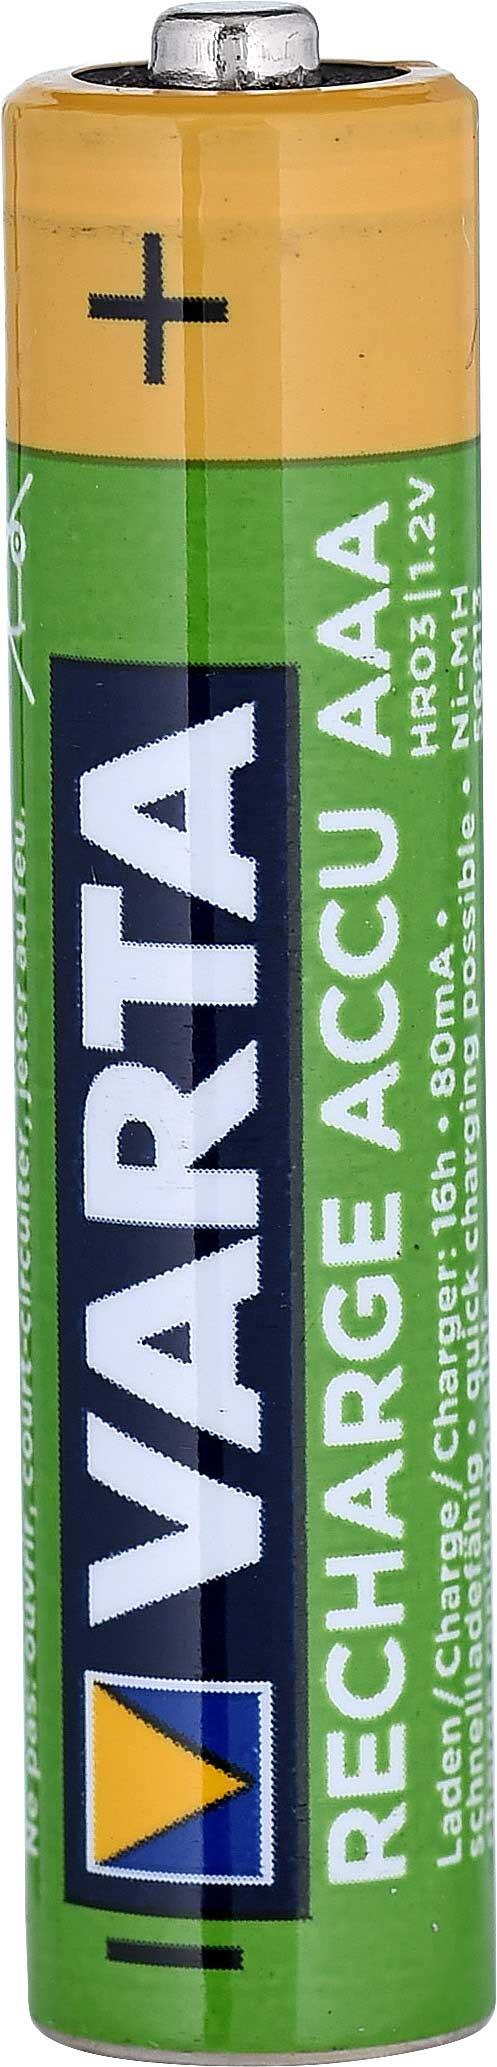 Recharge Accu Recycled  800 Varta